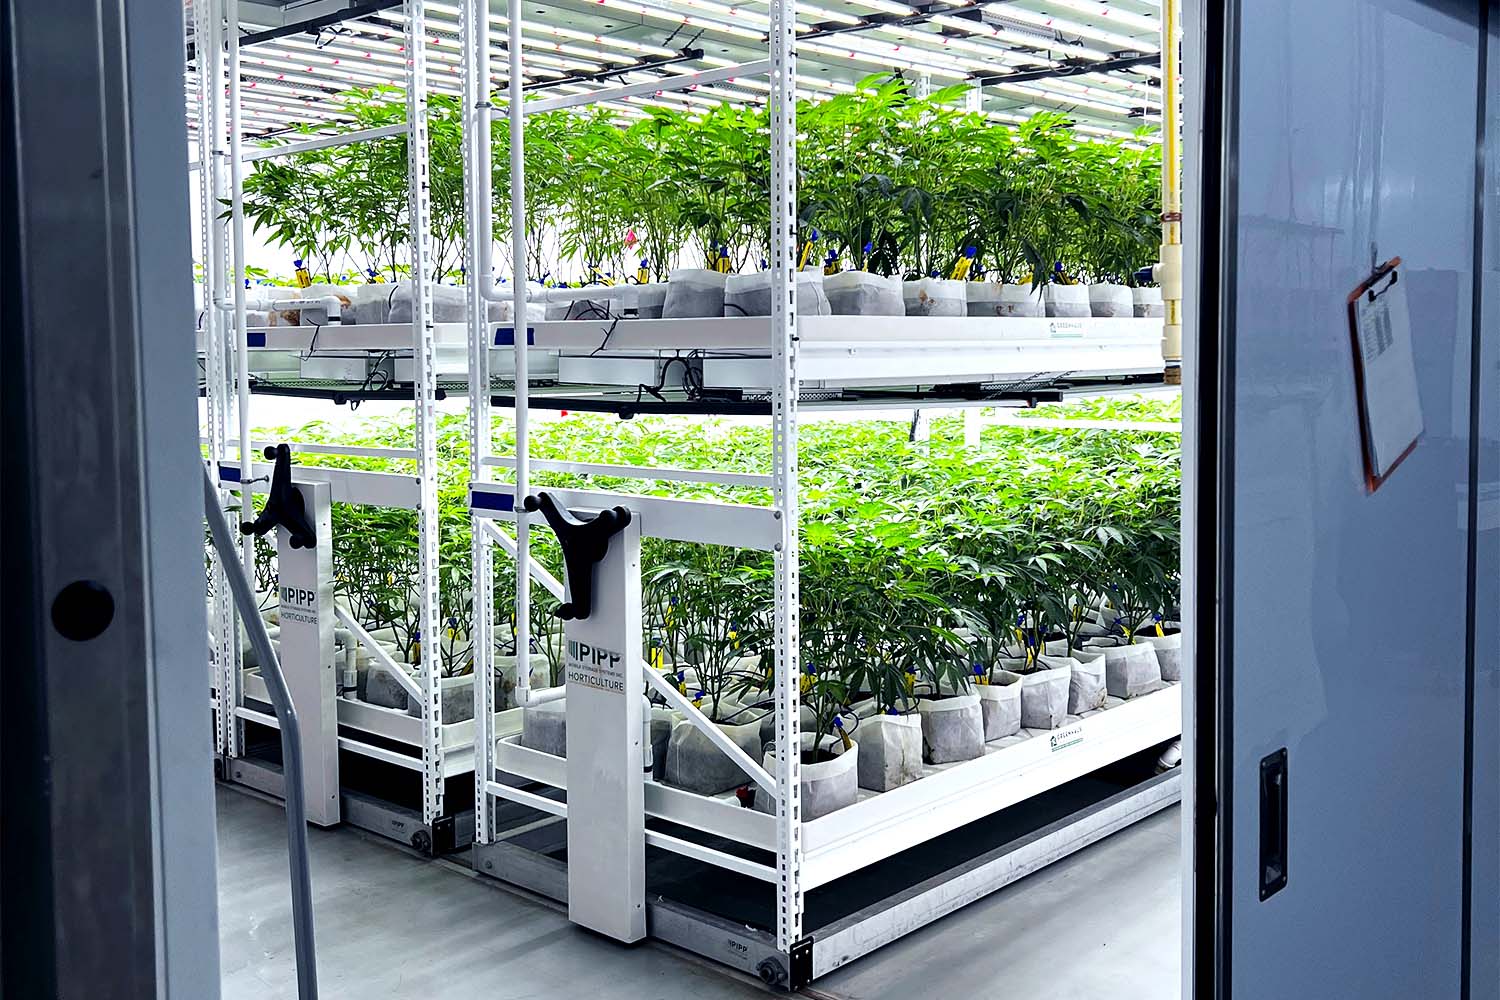 Multi-Tier Grow Racks by Pipp Horticulture at Culta